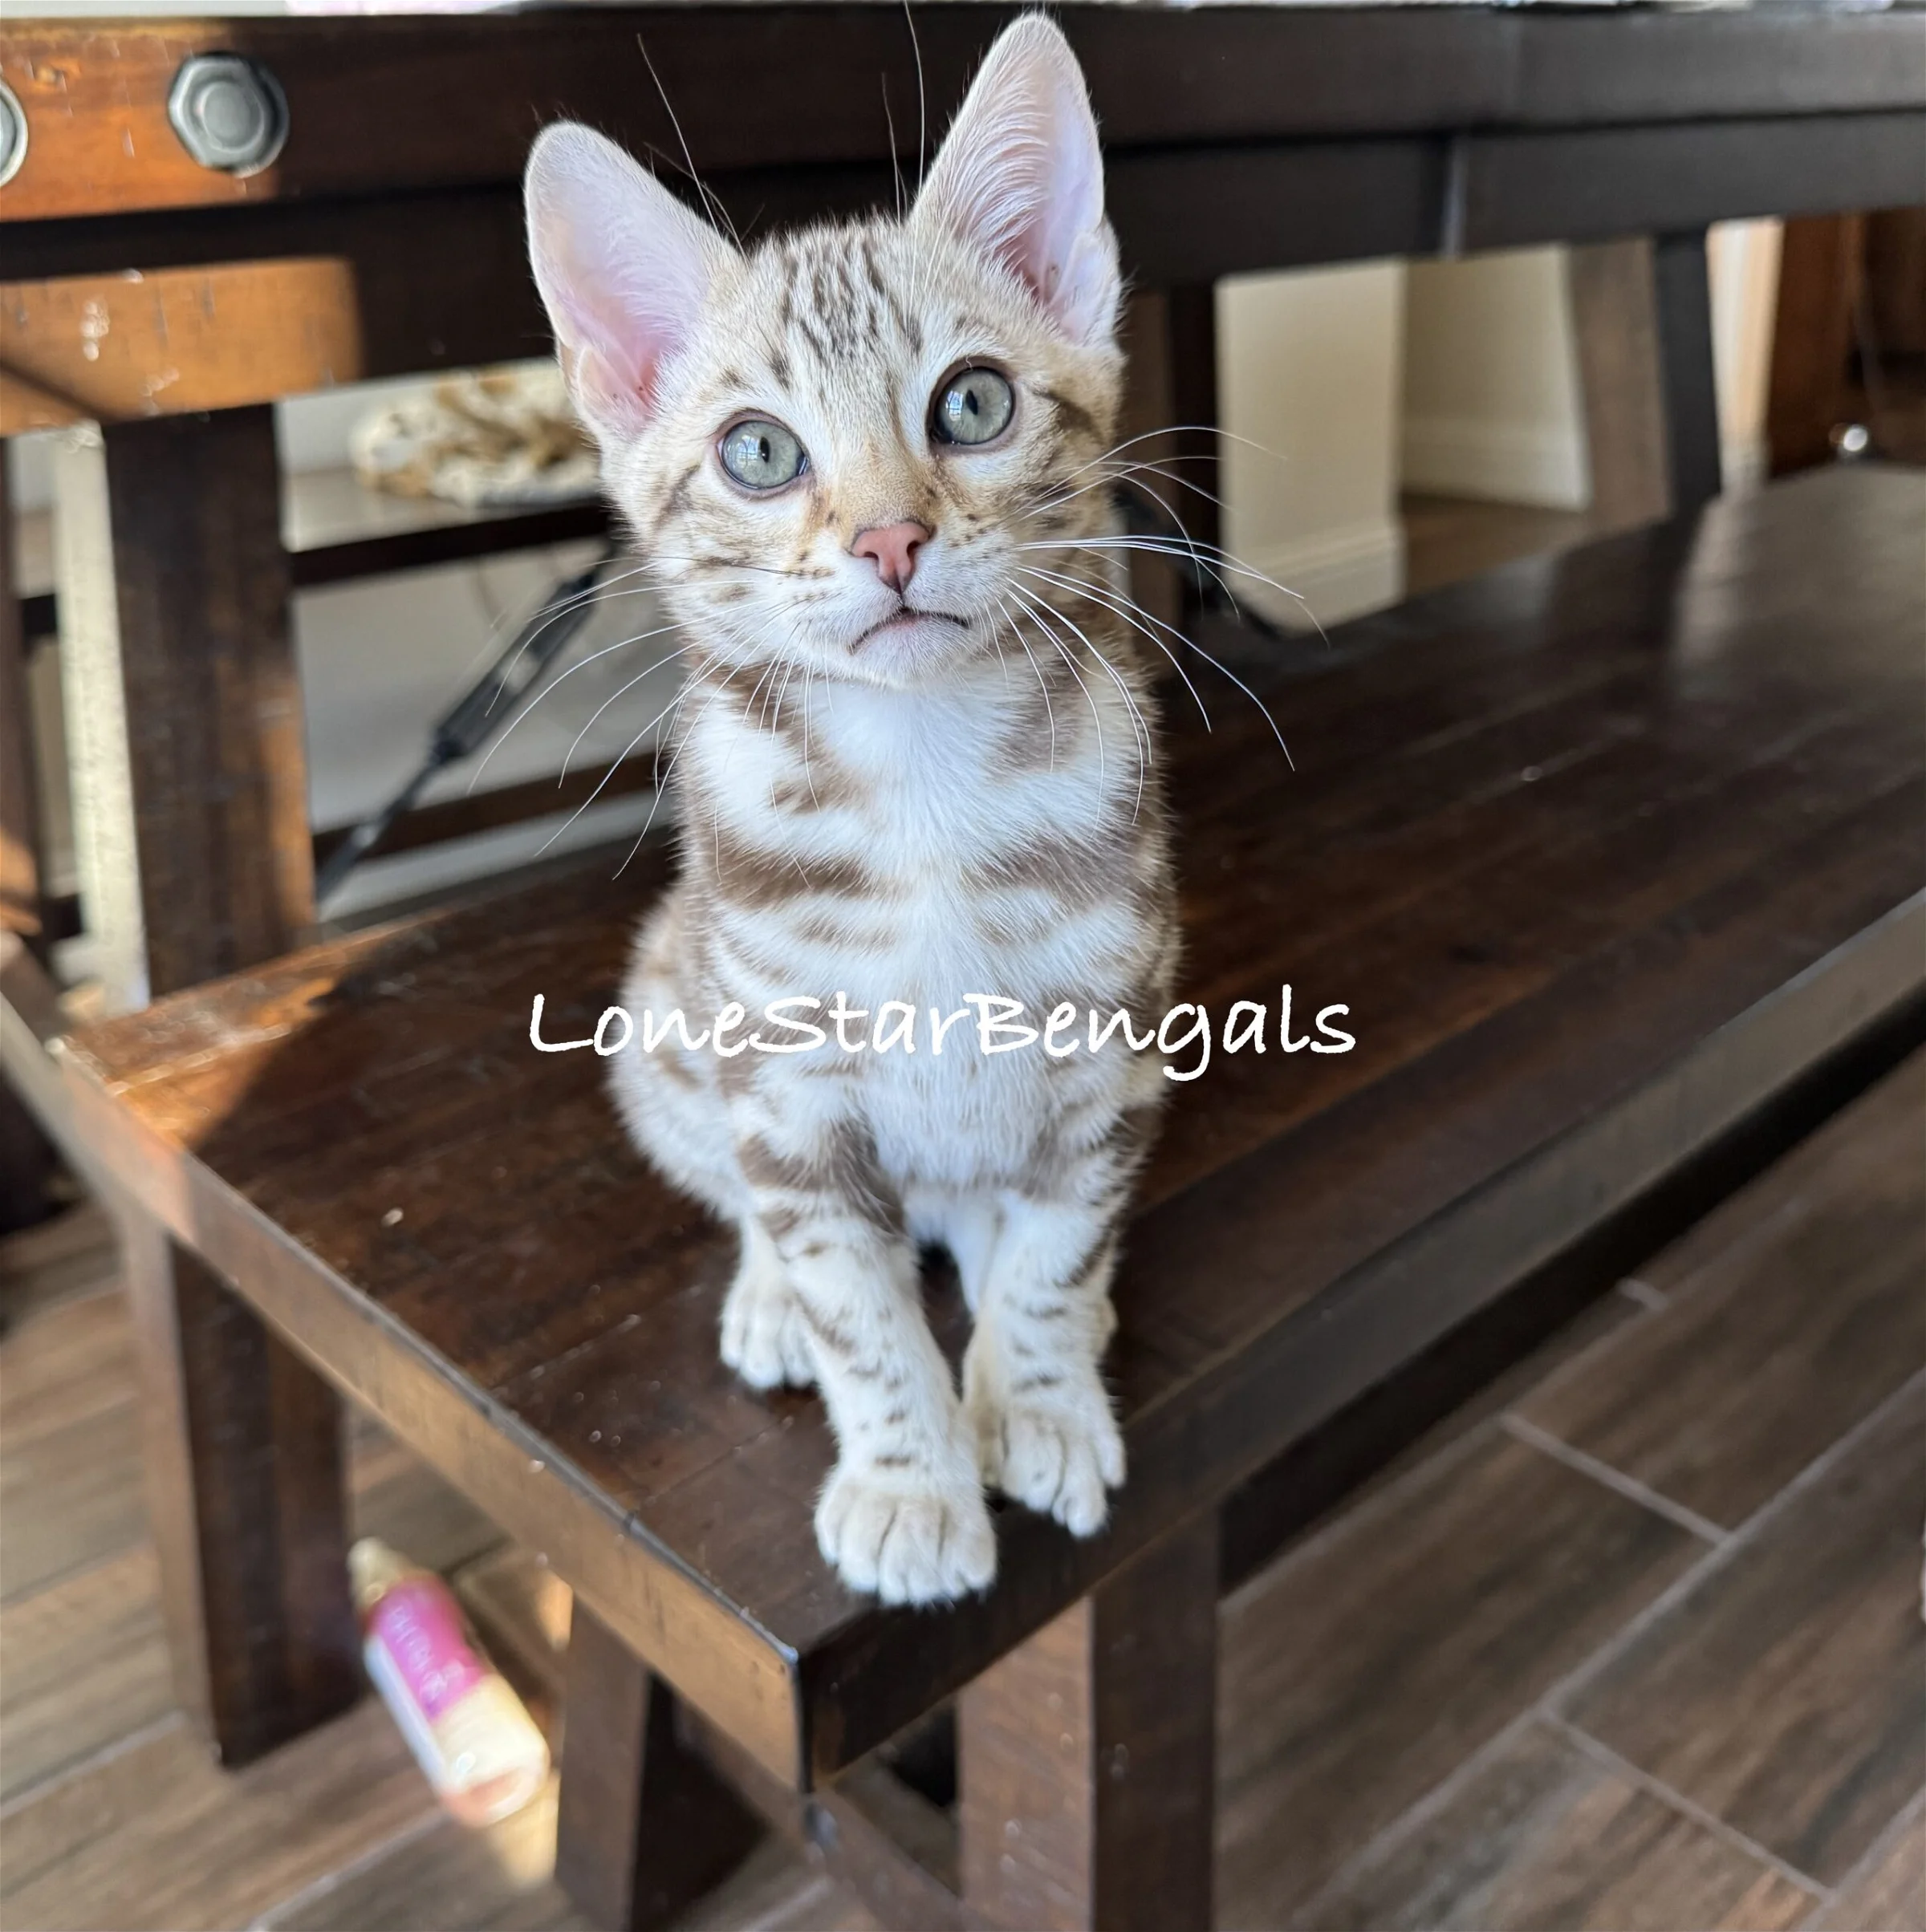 A Superior Quality Bengal kitten sitting on a wooden bench.